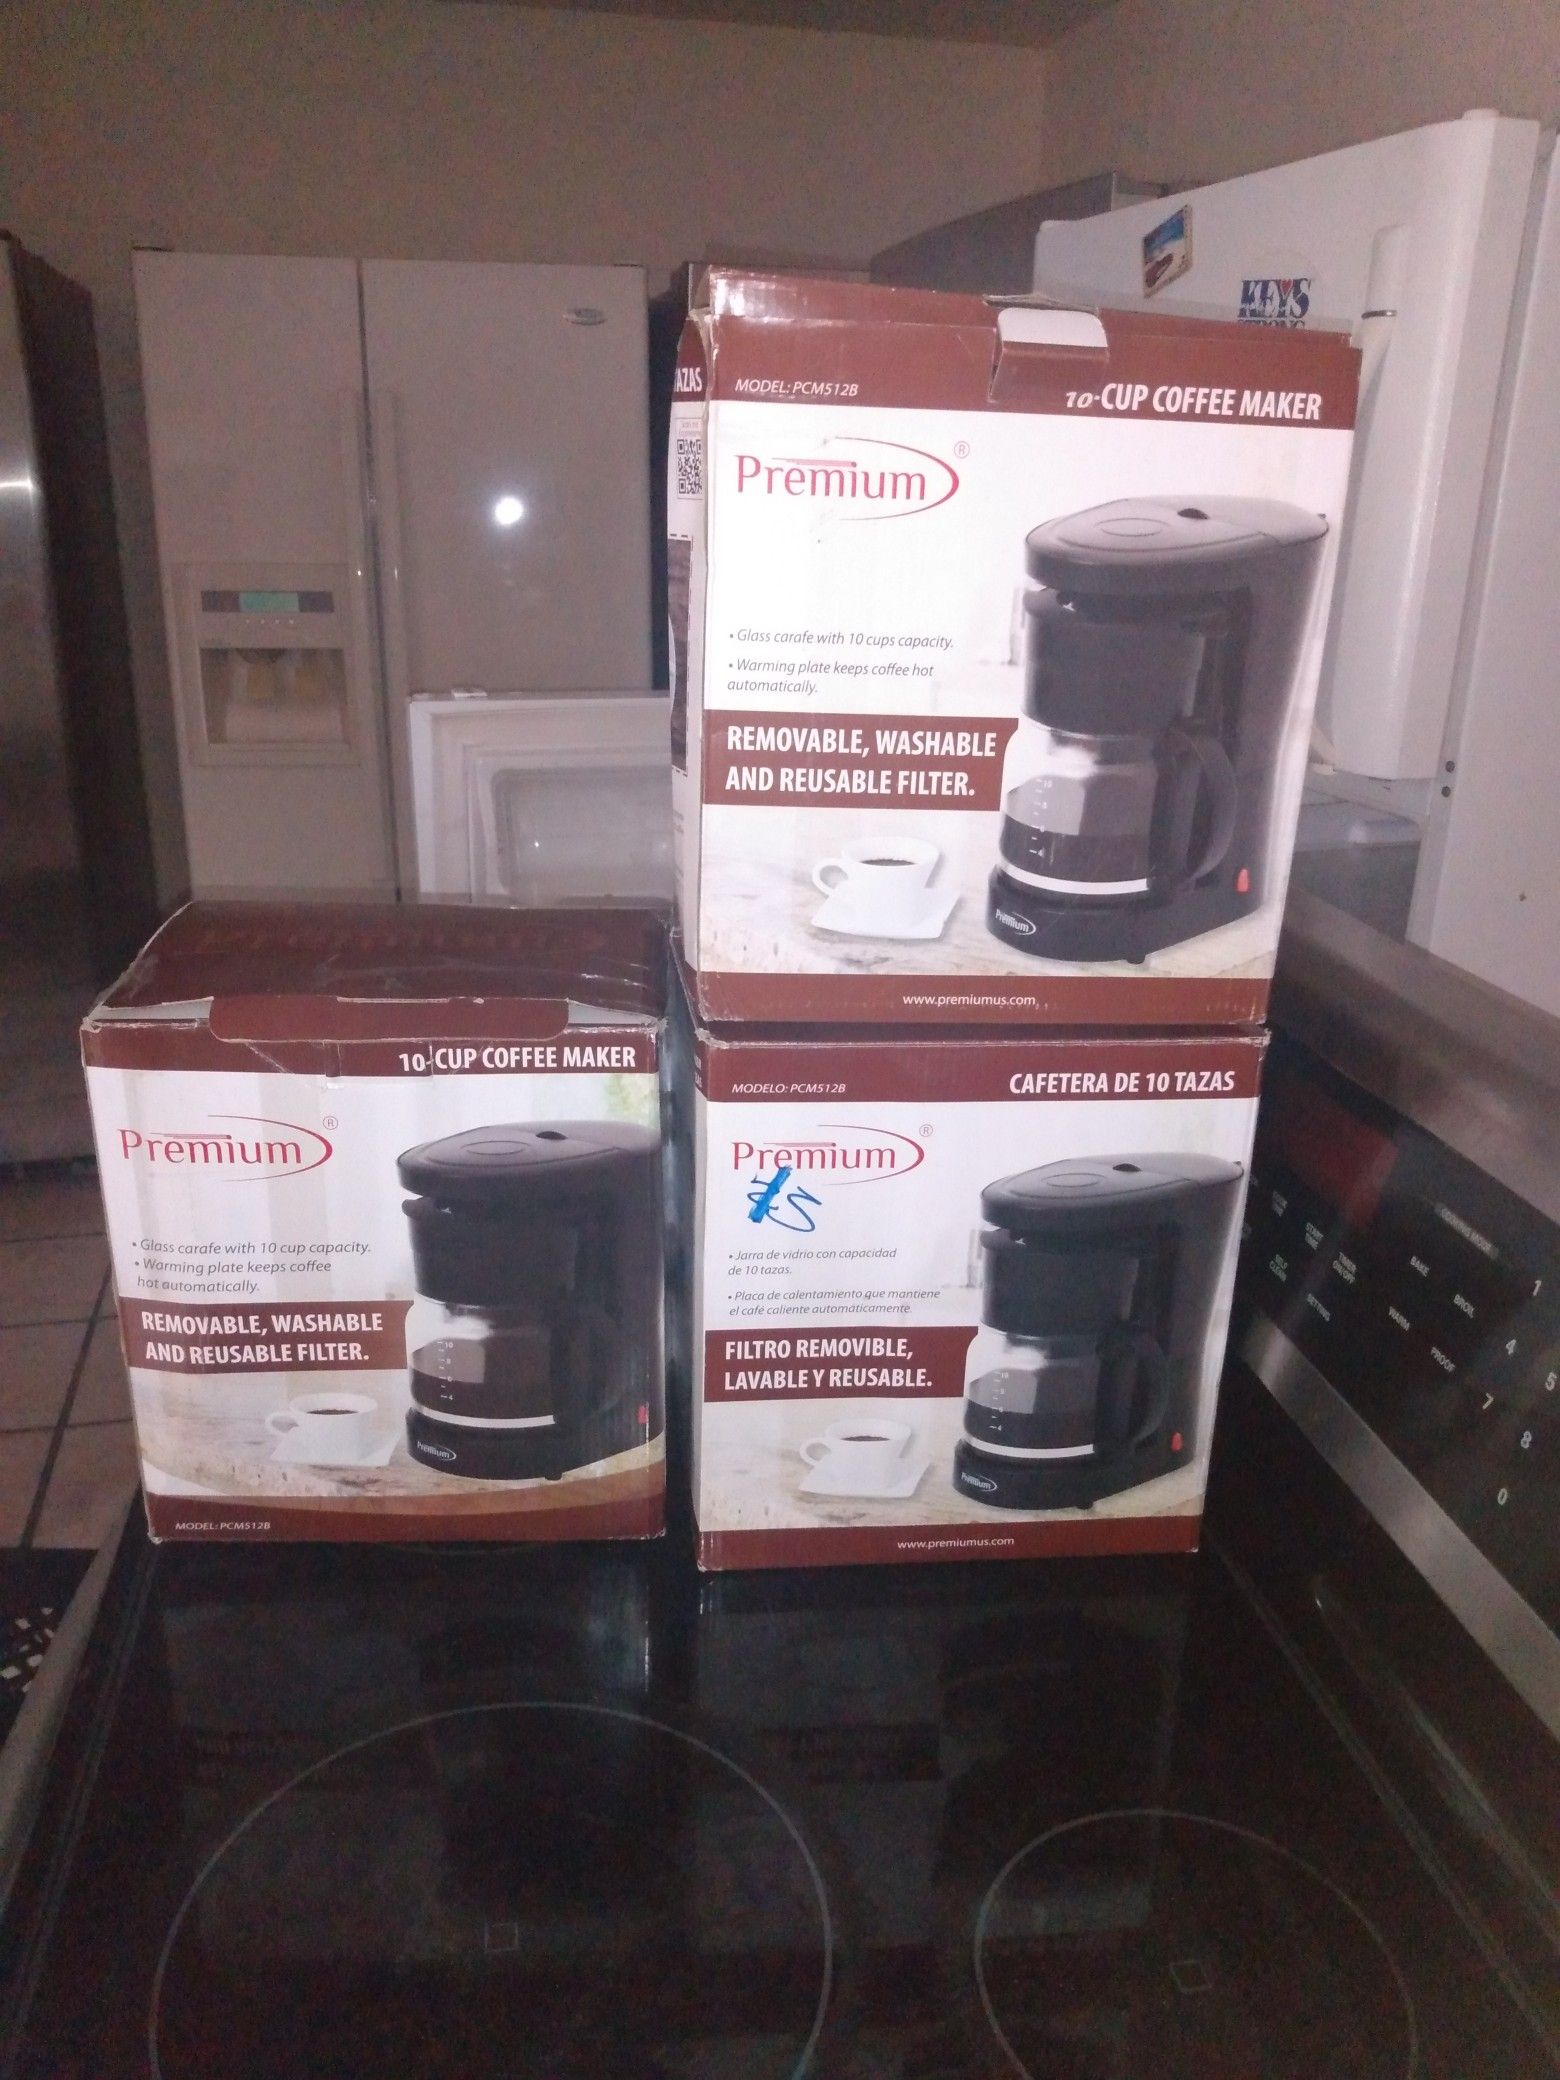 10 cup coffee maker (10)